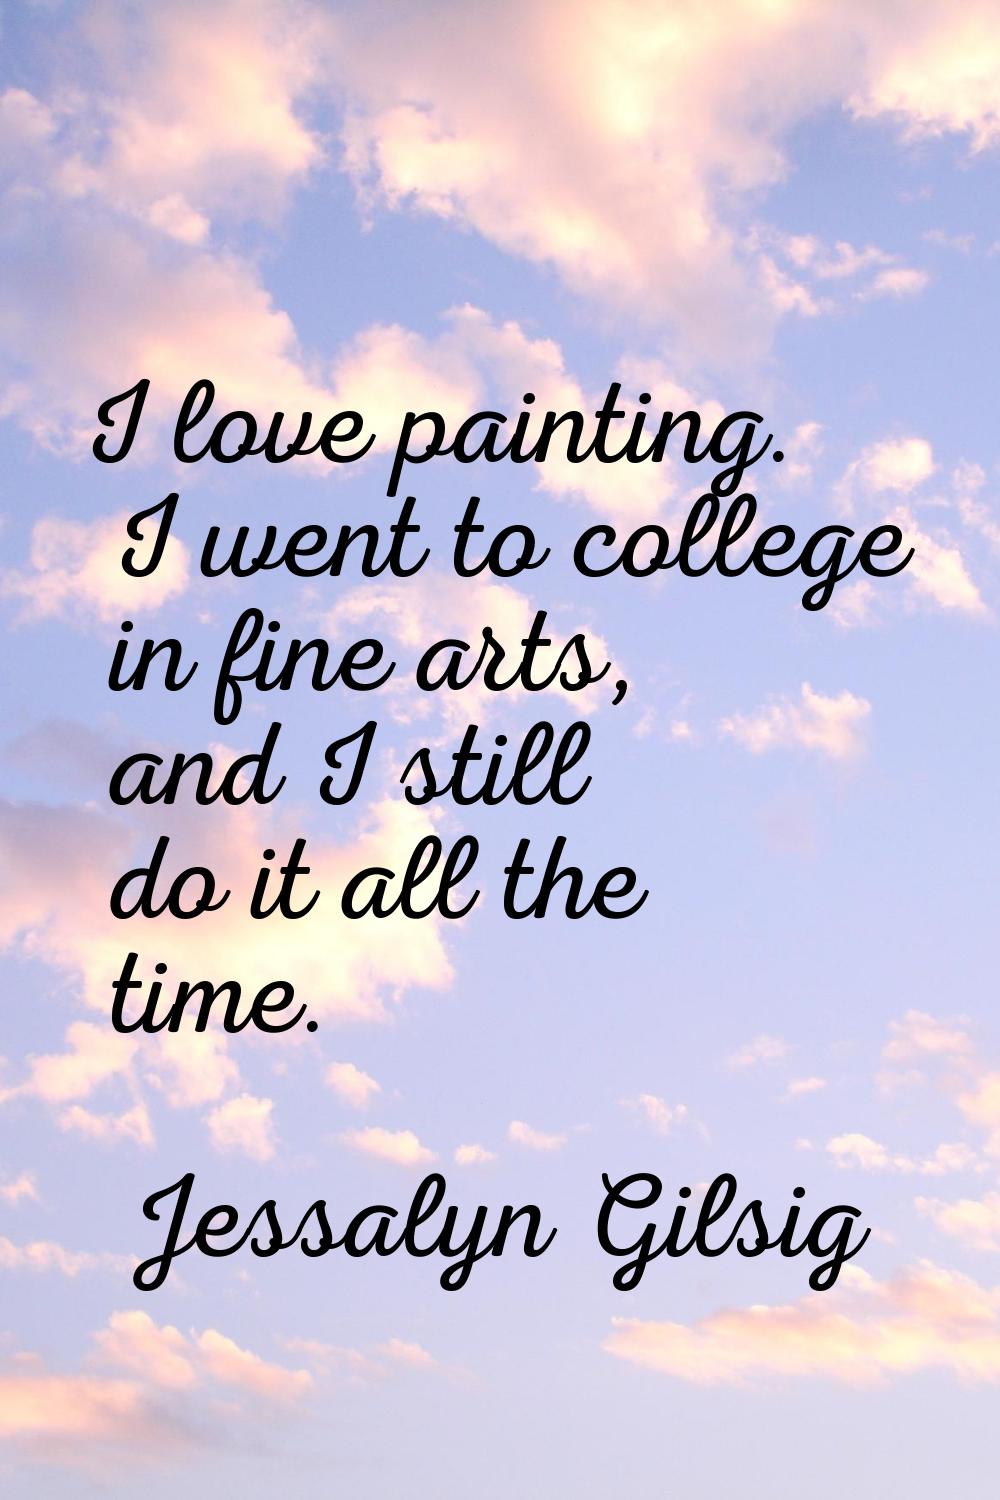 I love painting. I went to college in fine arts, and I still do it all the time.